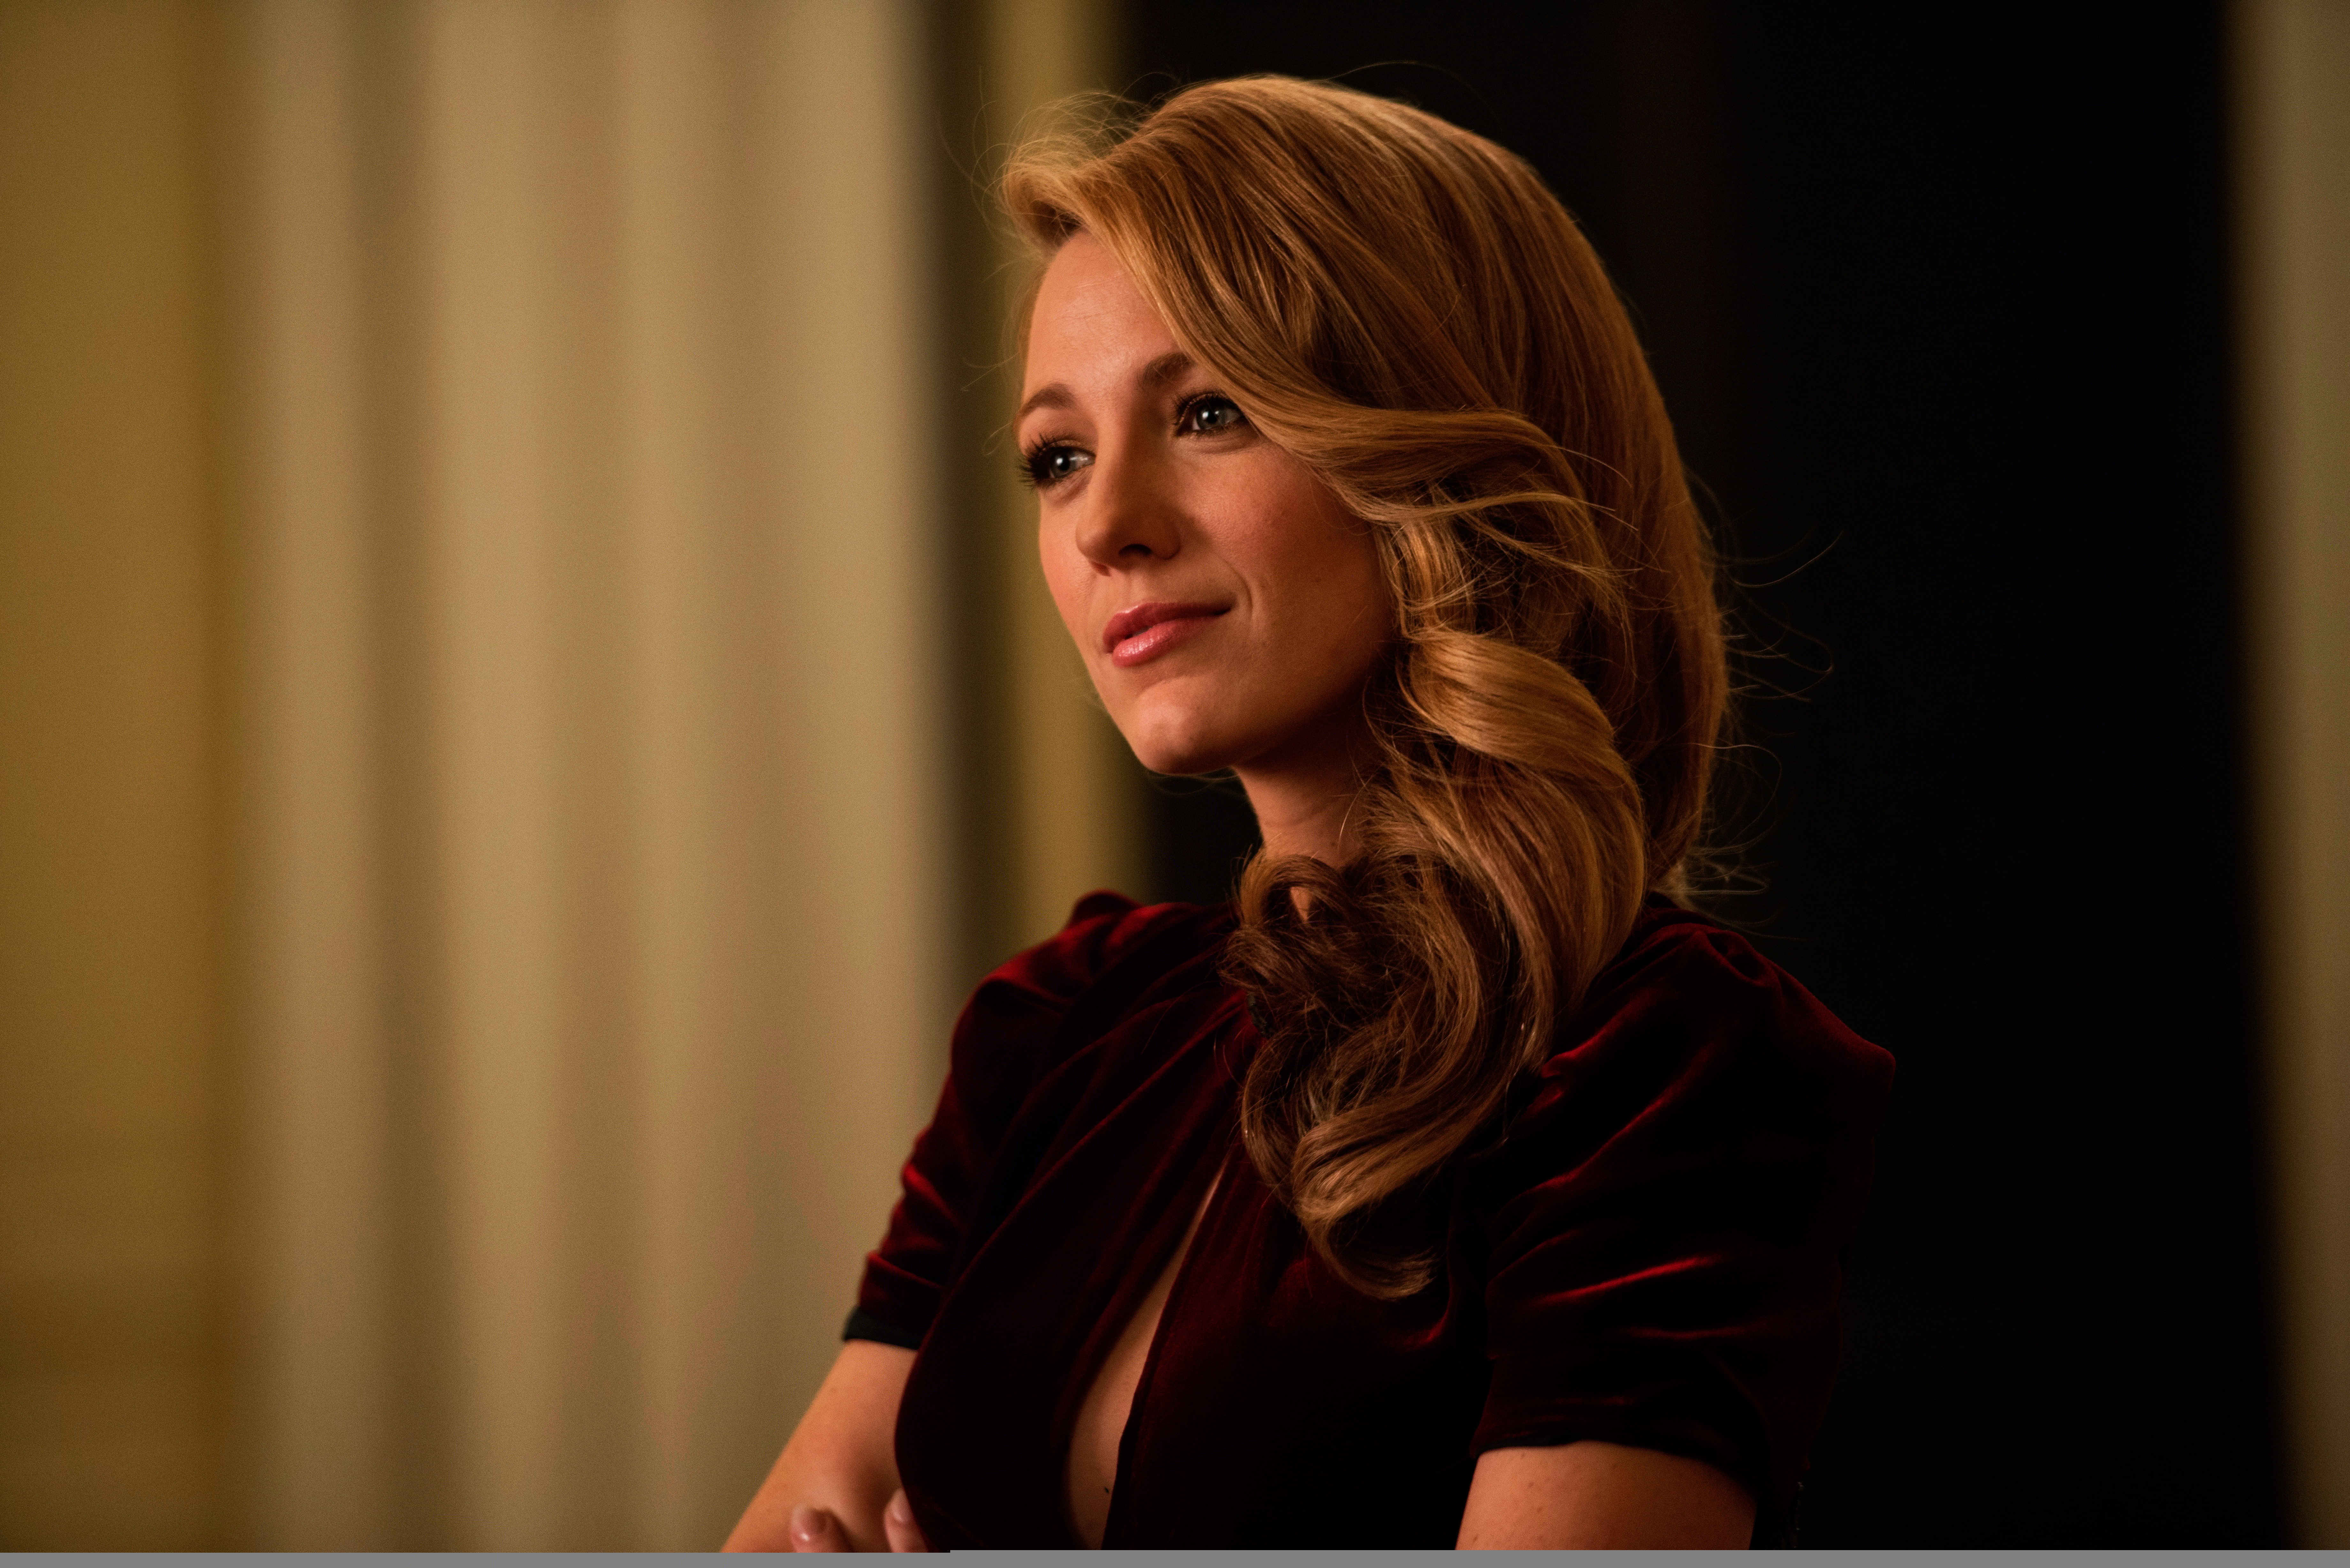 Blake Lively, 2015, The Age of Adaline, one person, portrait